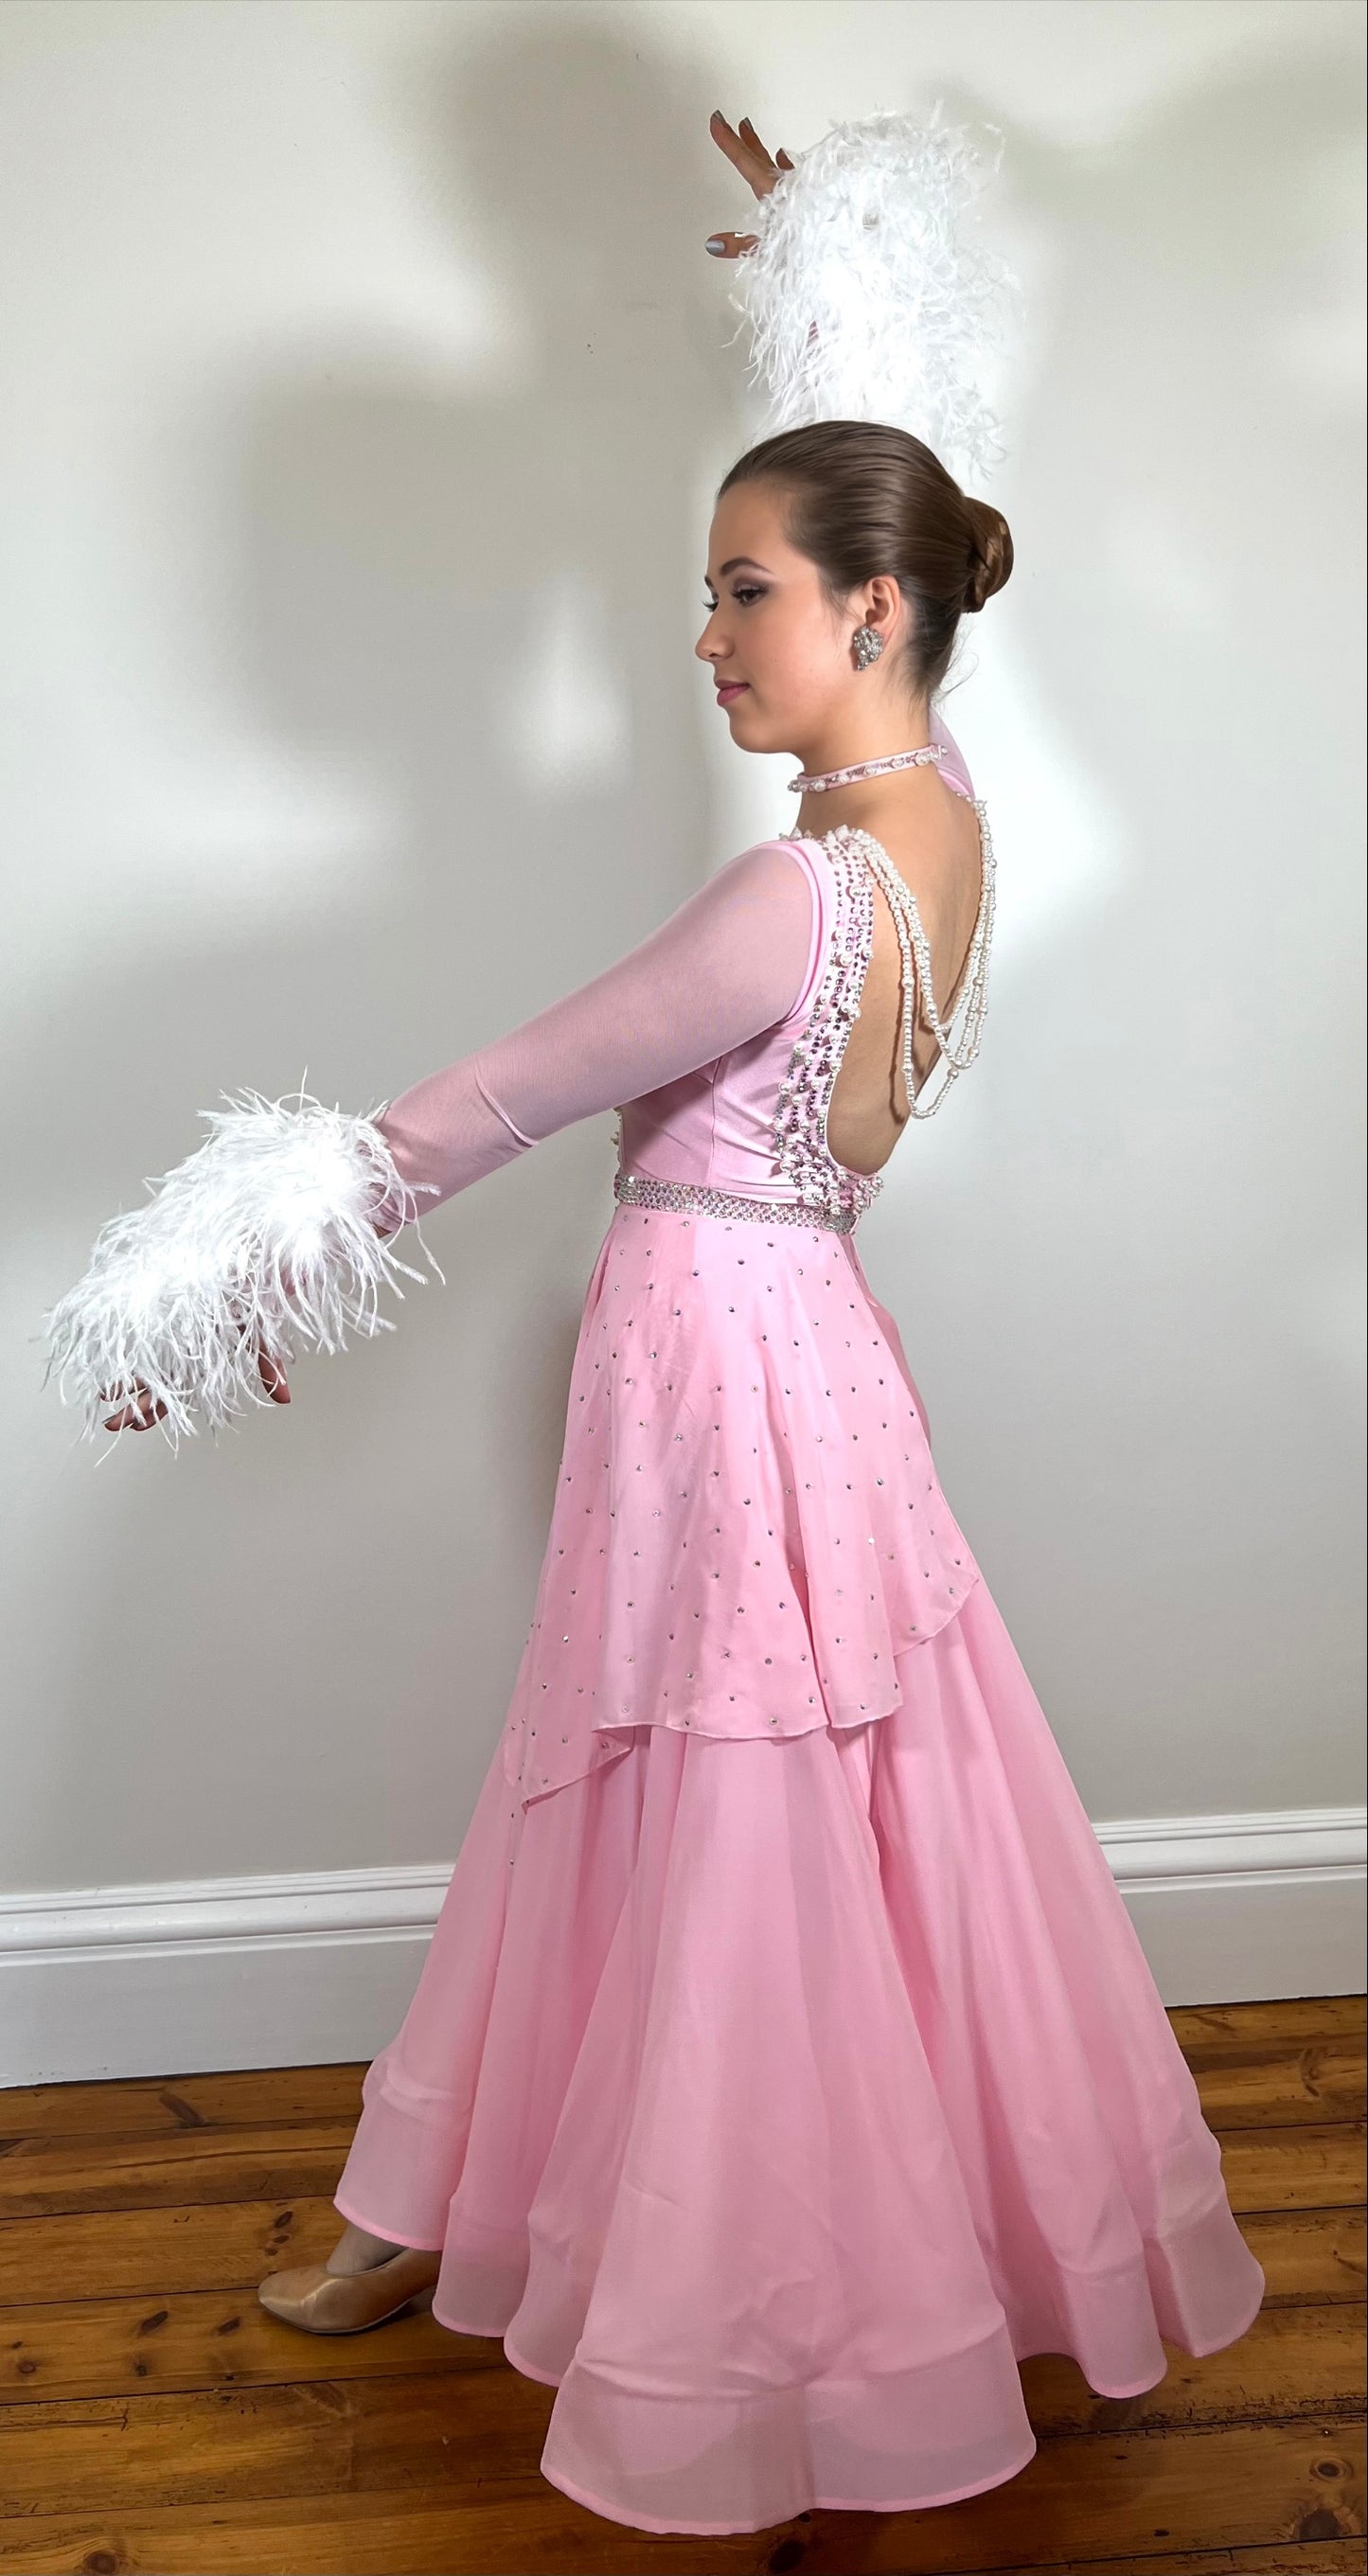 226 Pale Pink Ballroom/Smooth Dress. Decorated with Light Amethyst stones & pearls. Ostrich feather cuffs and drape decoration to the waist area front & back